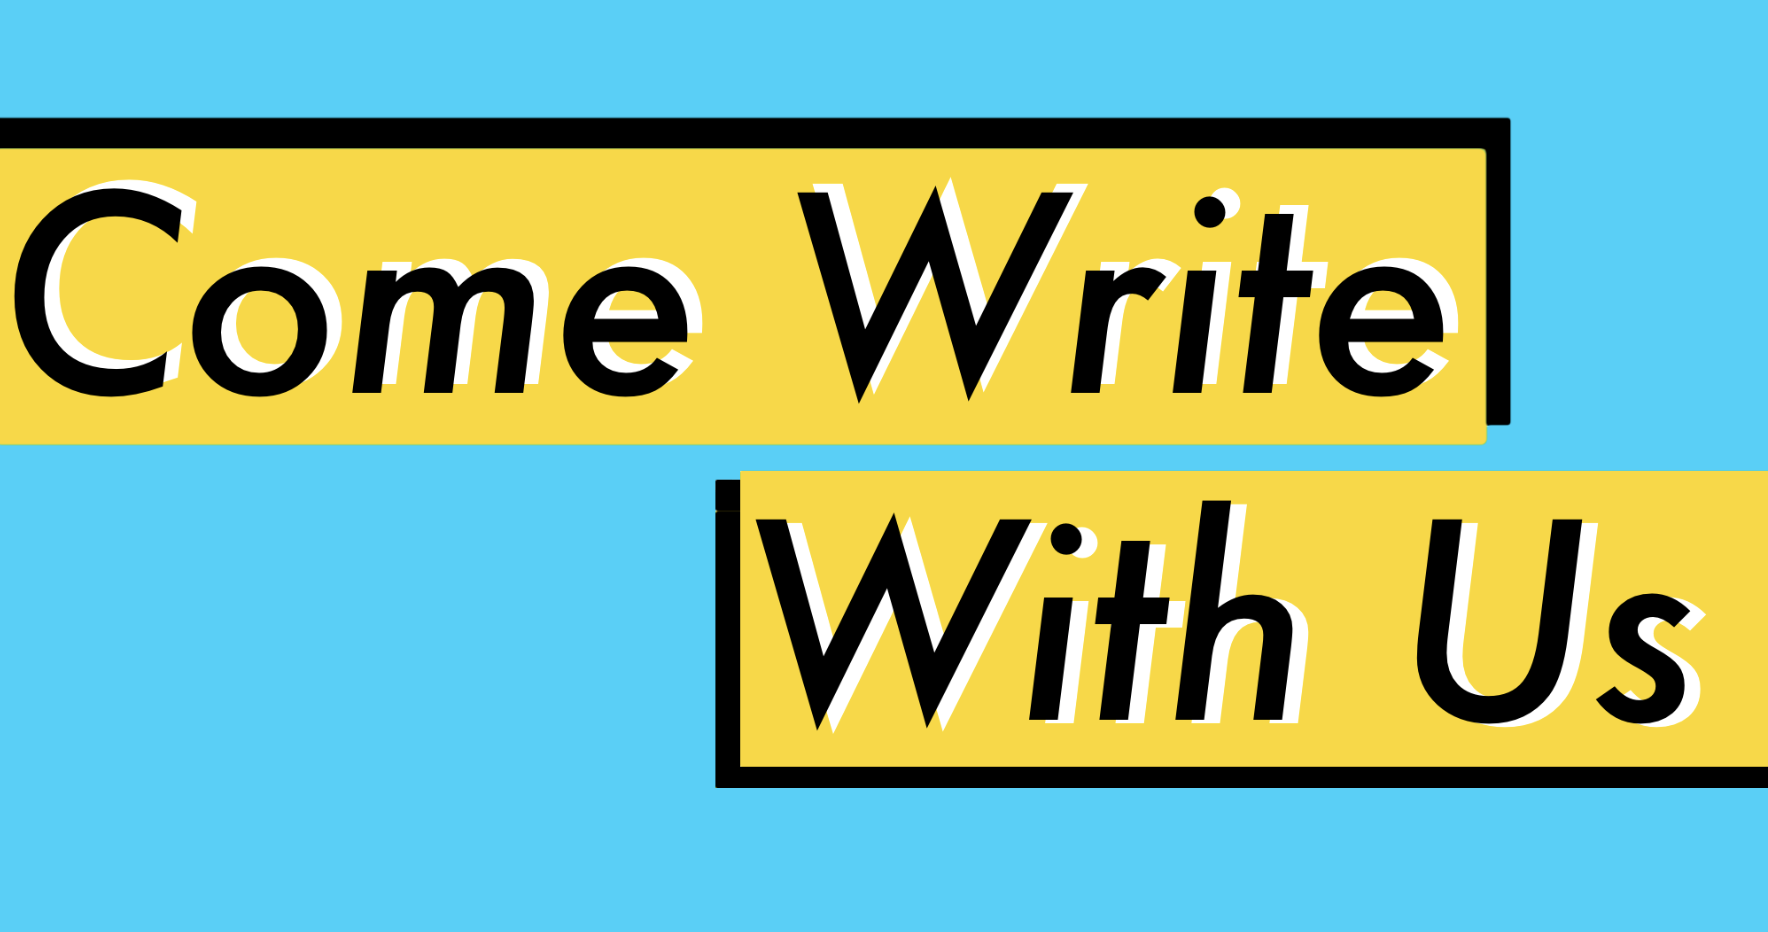 Come Write With Us